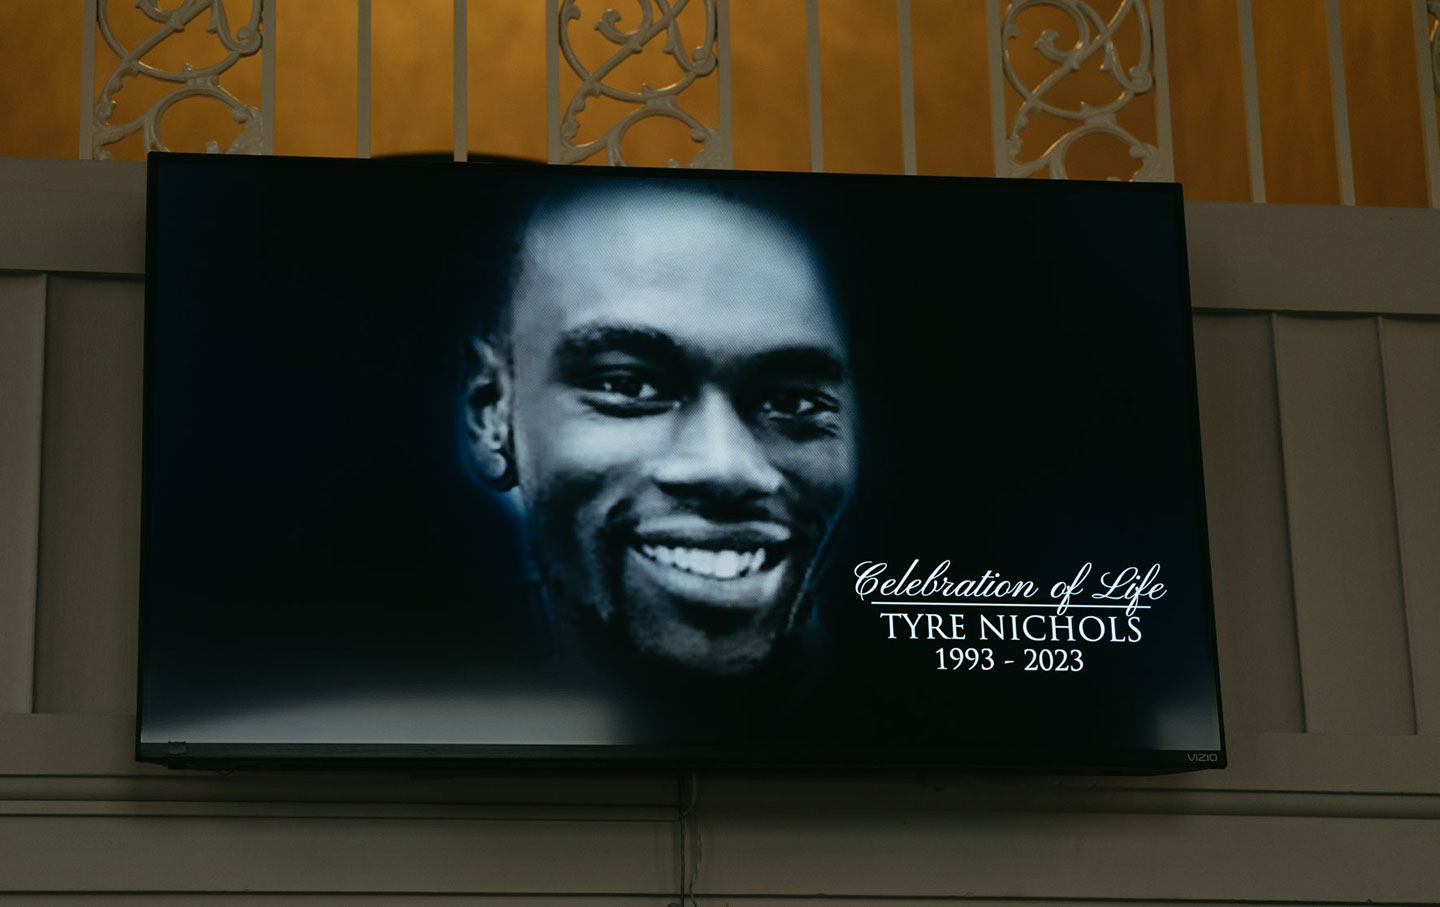 A screen at the entrance of Mississippi Boulevard Christian Church displays a picture of Tyre Nichols, who was beaten to death by police officers in January 2023.